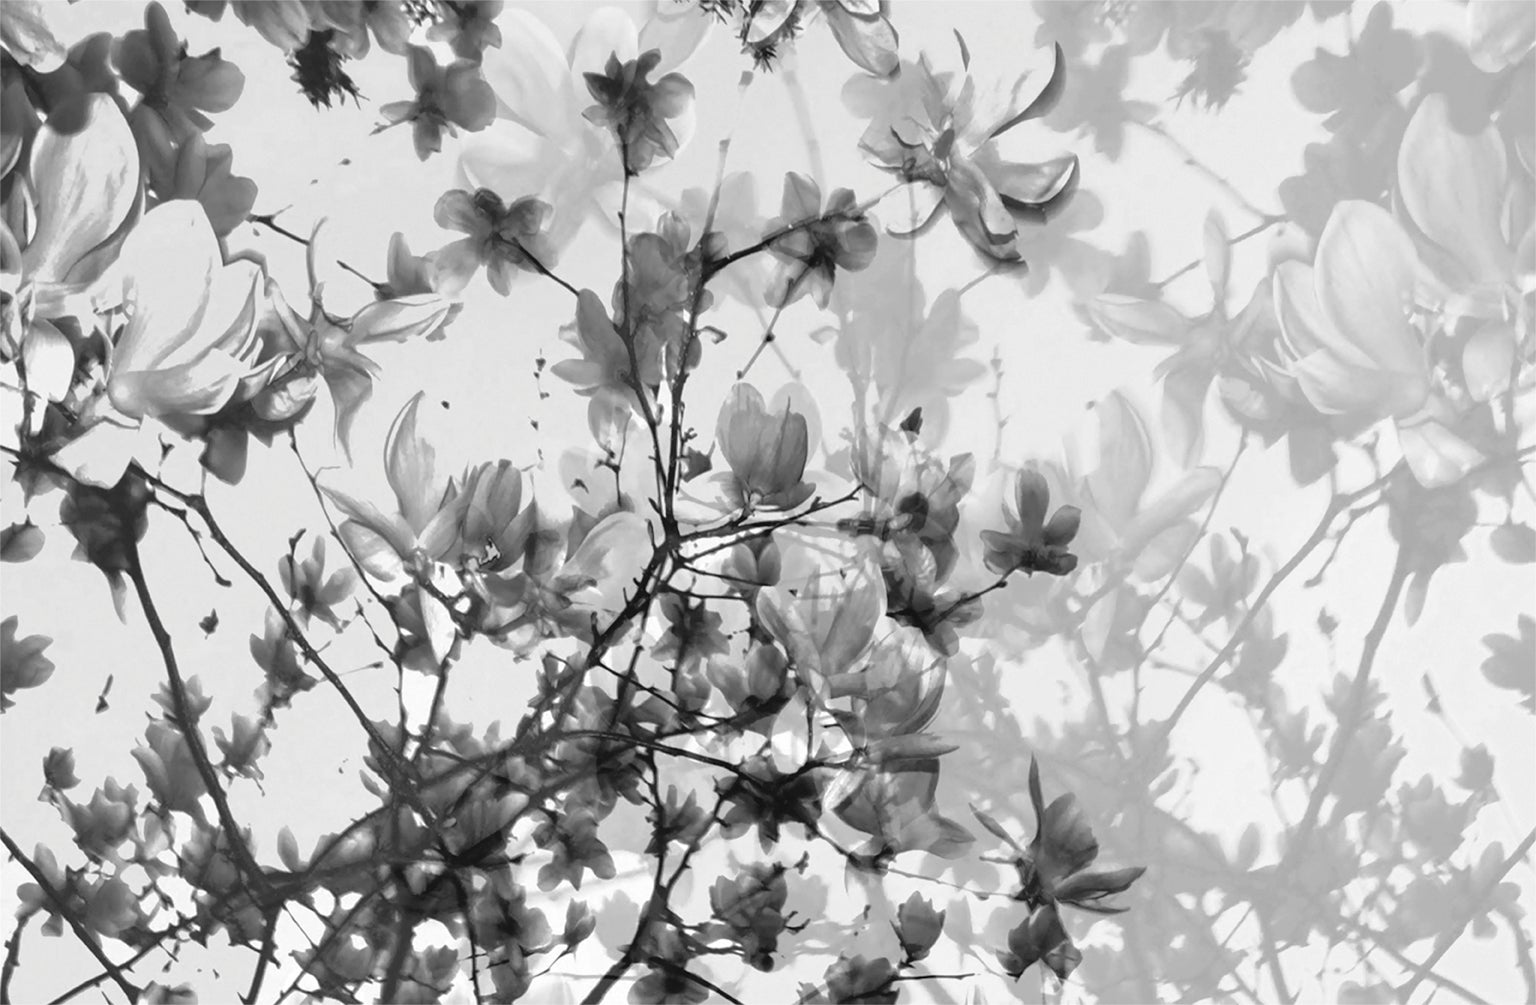 "The Fullest Bloom, " Framed Limited Edition Black & White Photograph by Layla Love, Companion Piece Availabe.